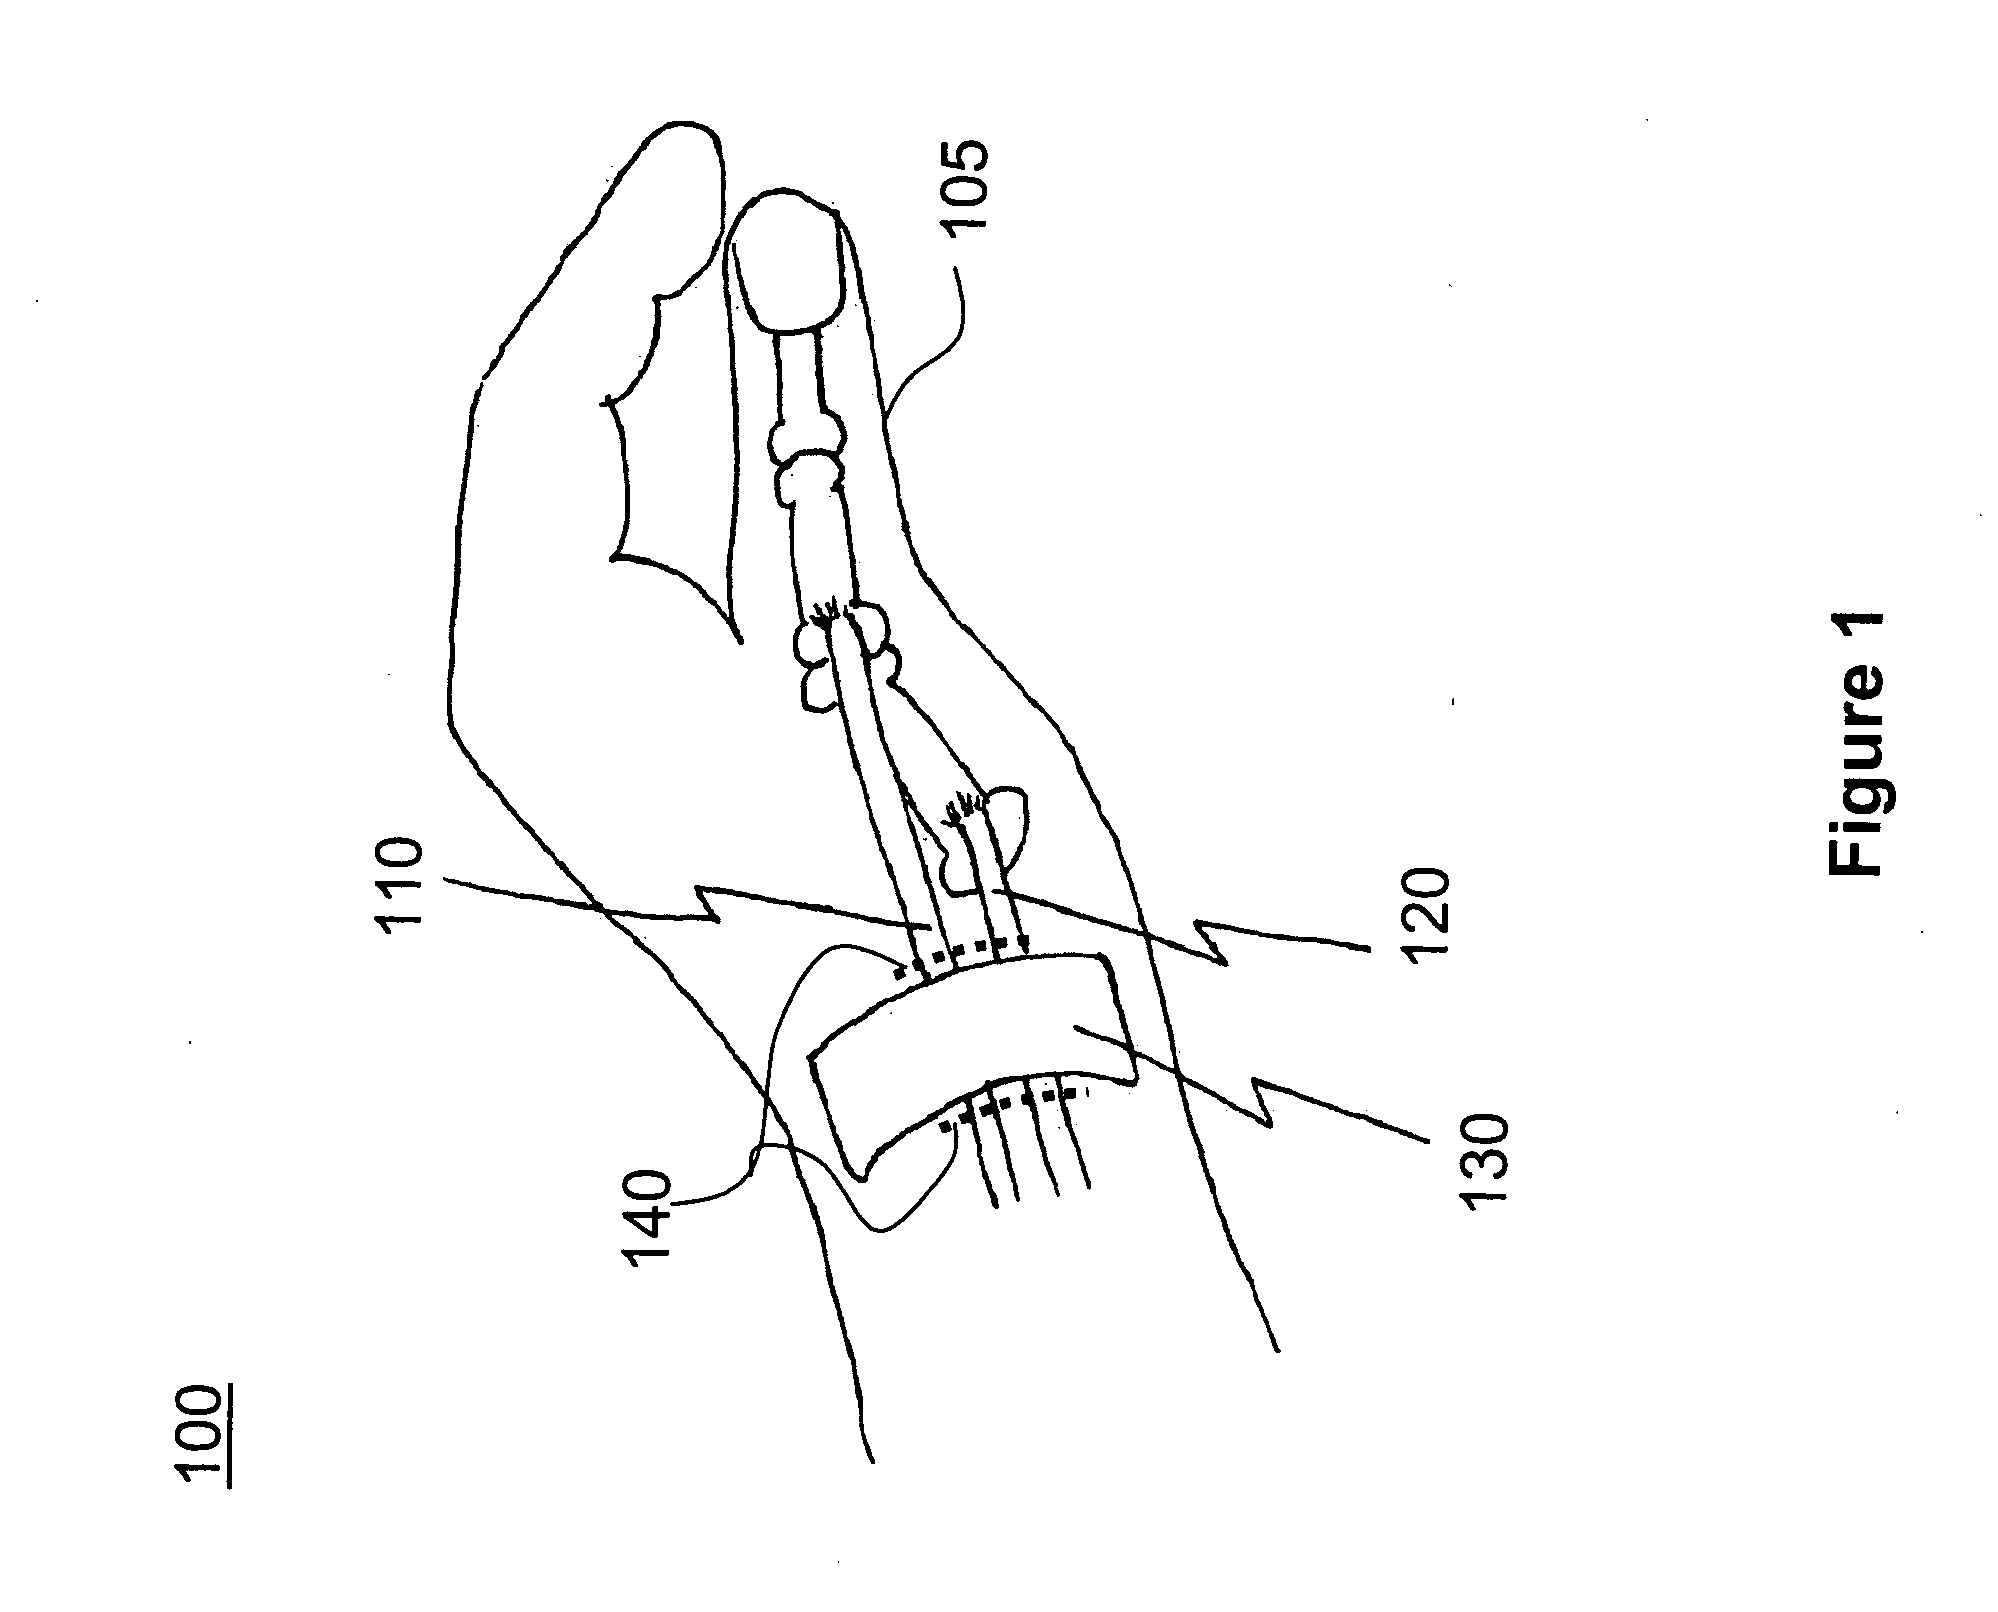 Apparatus and method for releasing tendon sheath